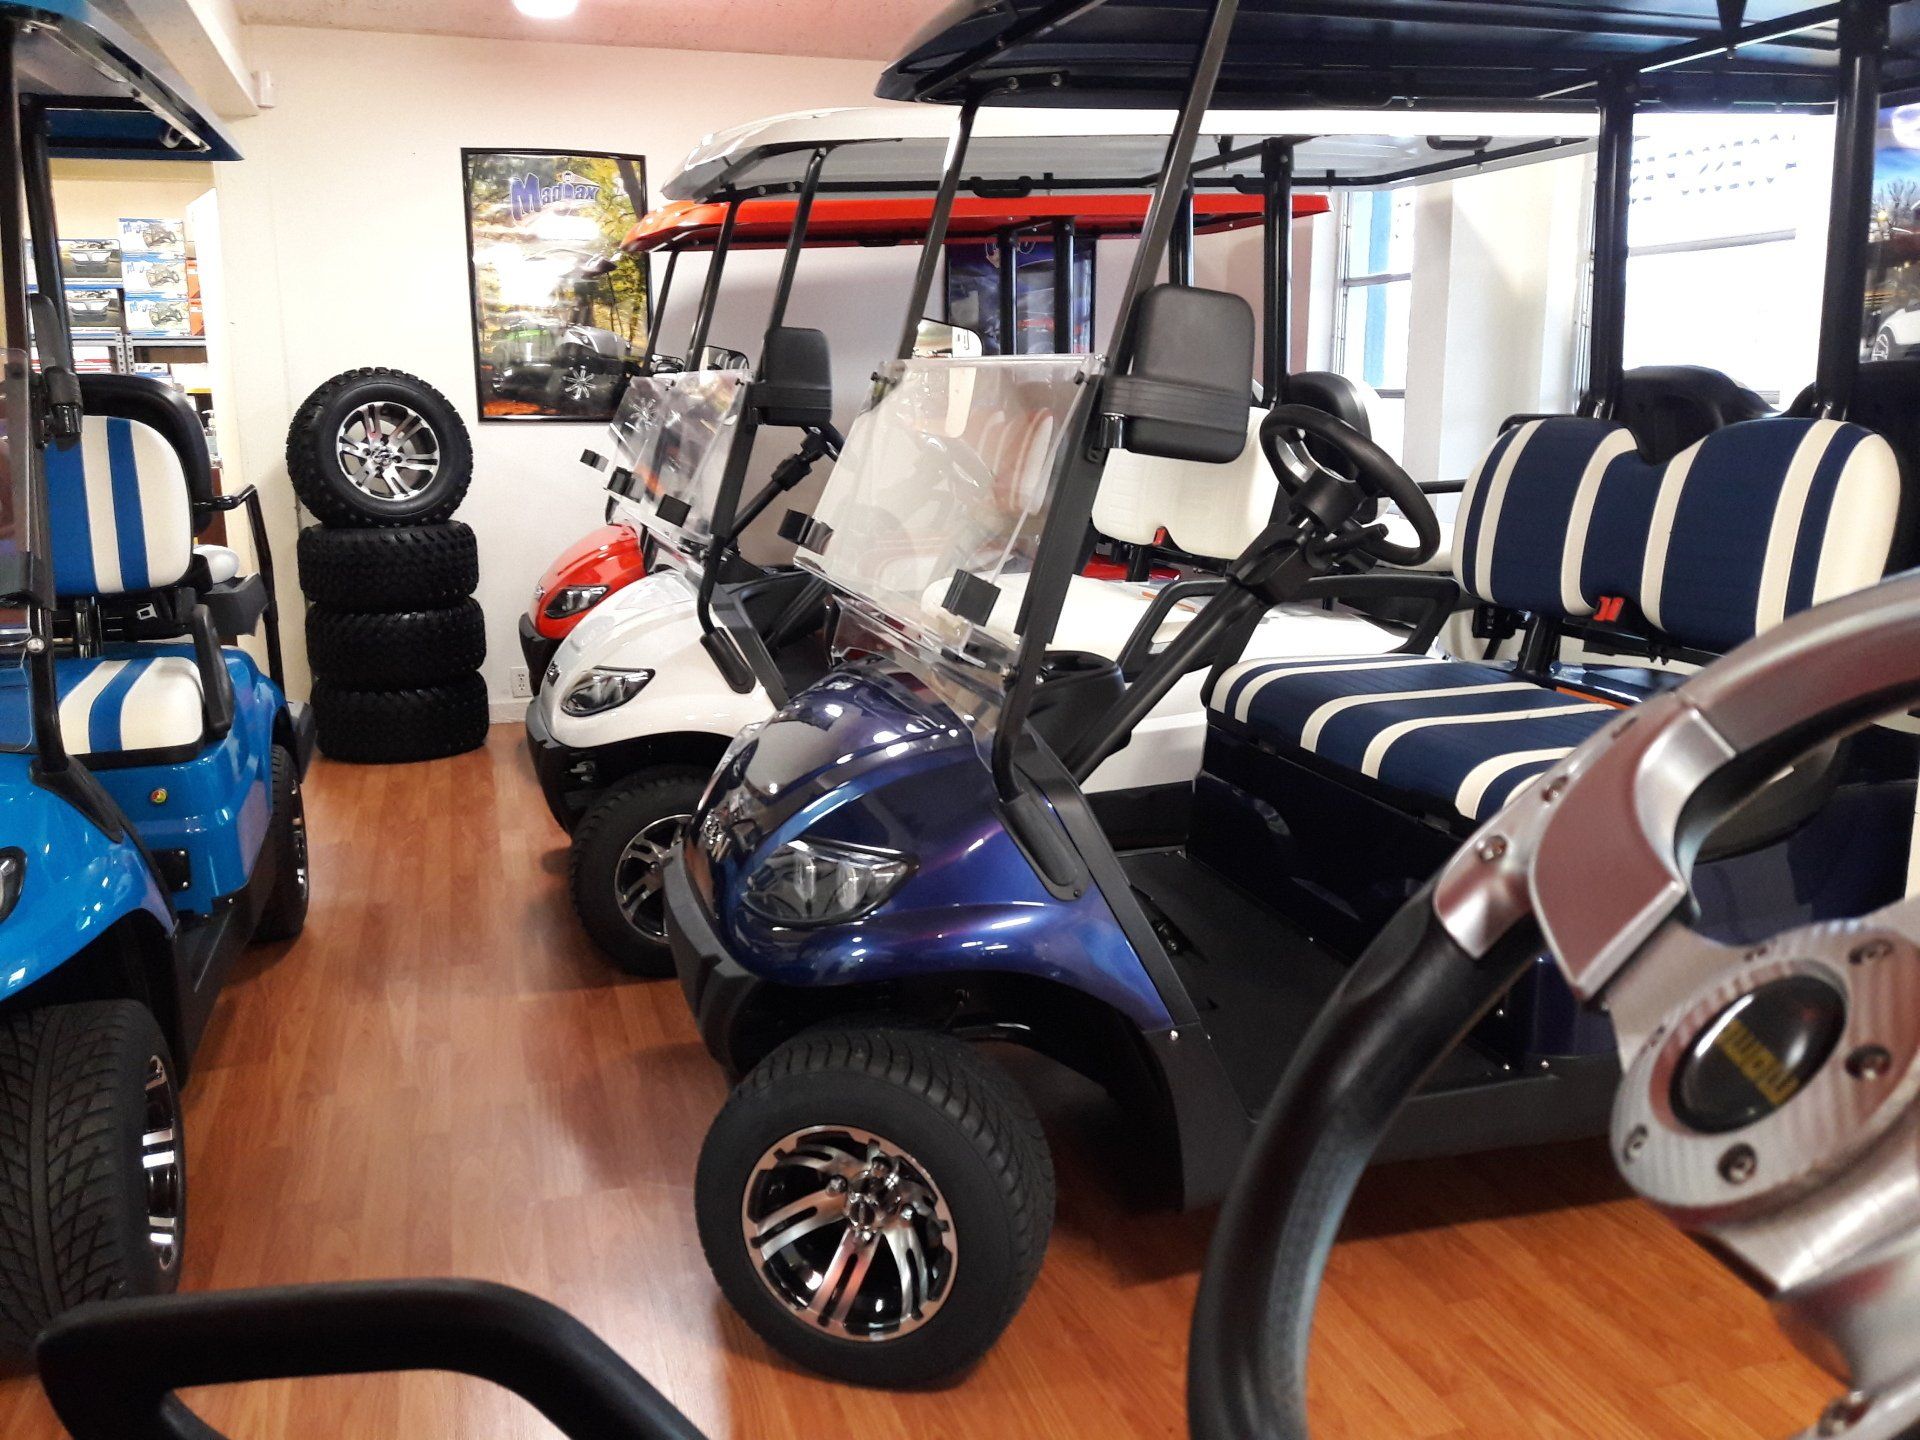 Red golf cart for sale - buy golf carts in St. Petersburg, FL